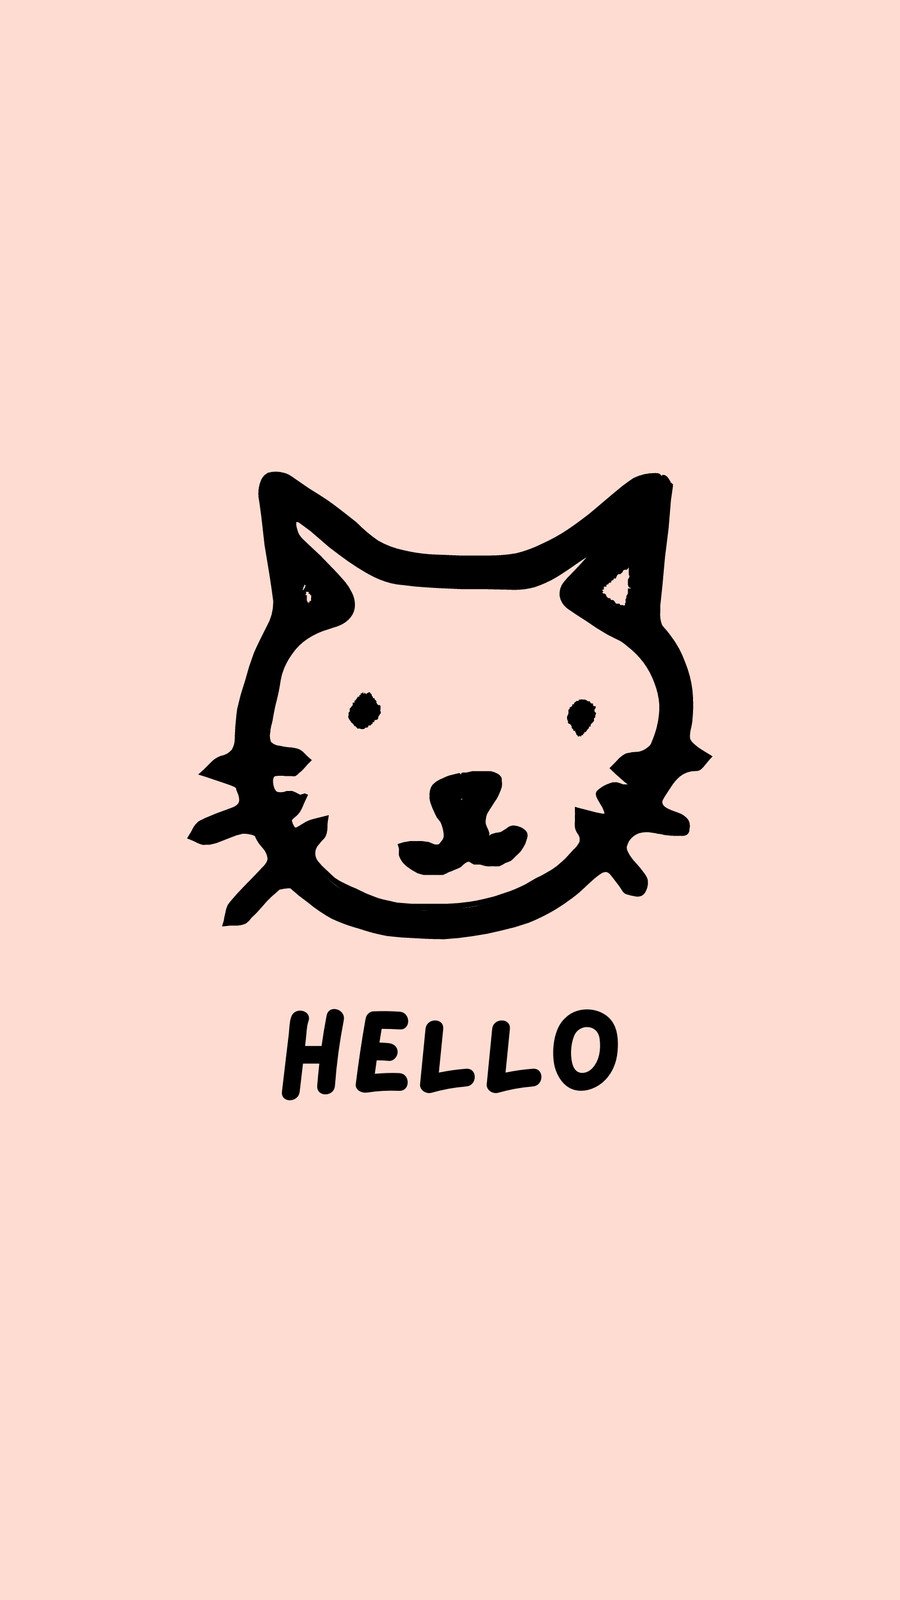 Page 3 - Free and customizable cute cat wallpaper templates